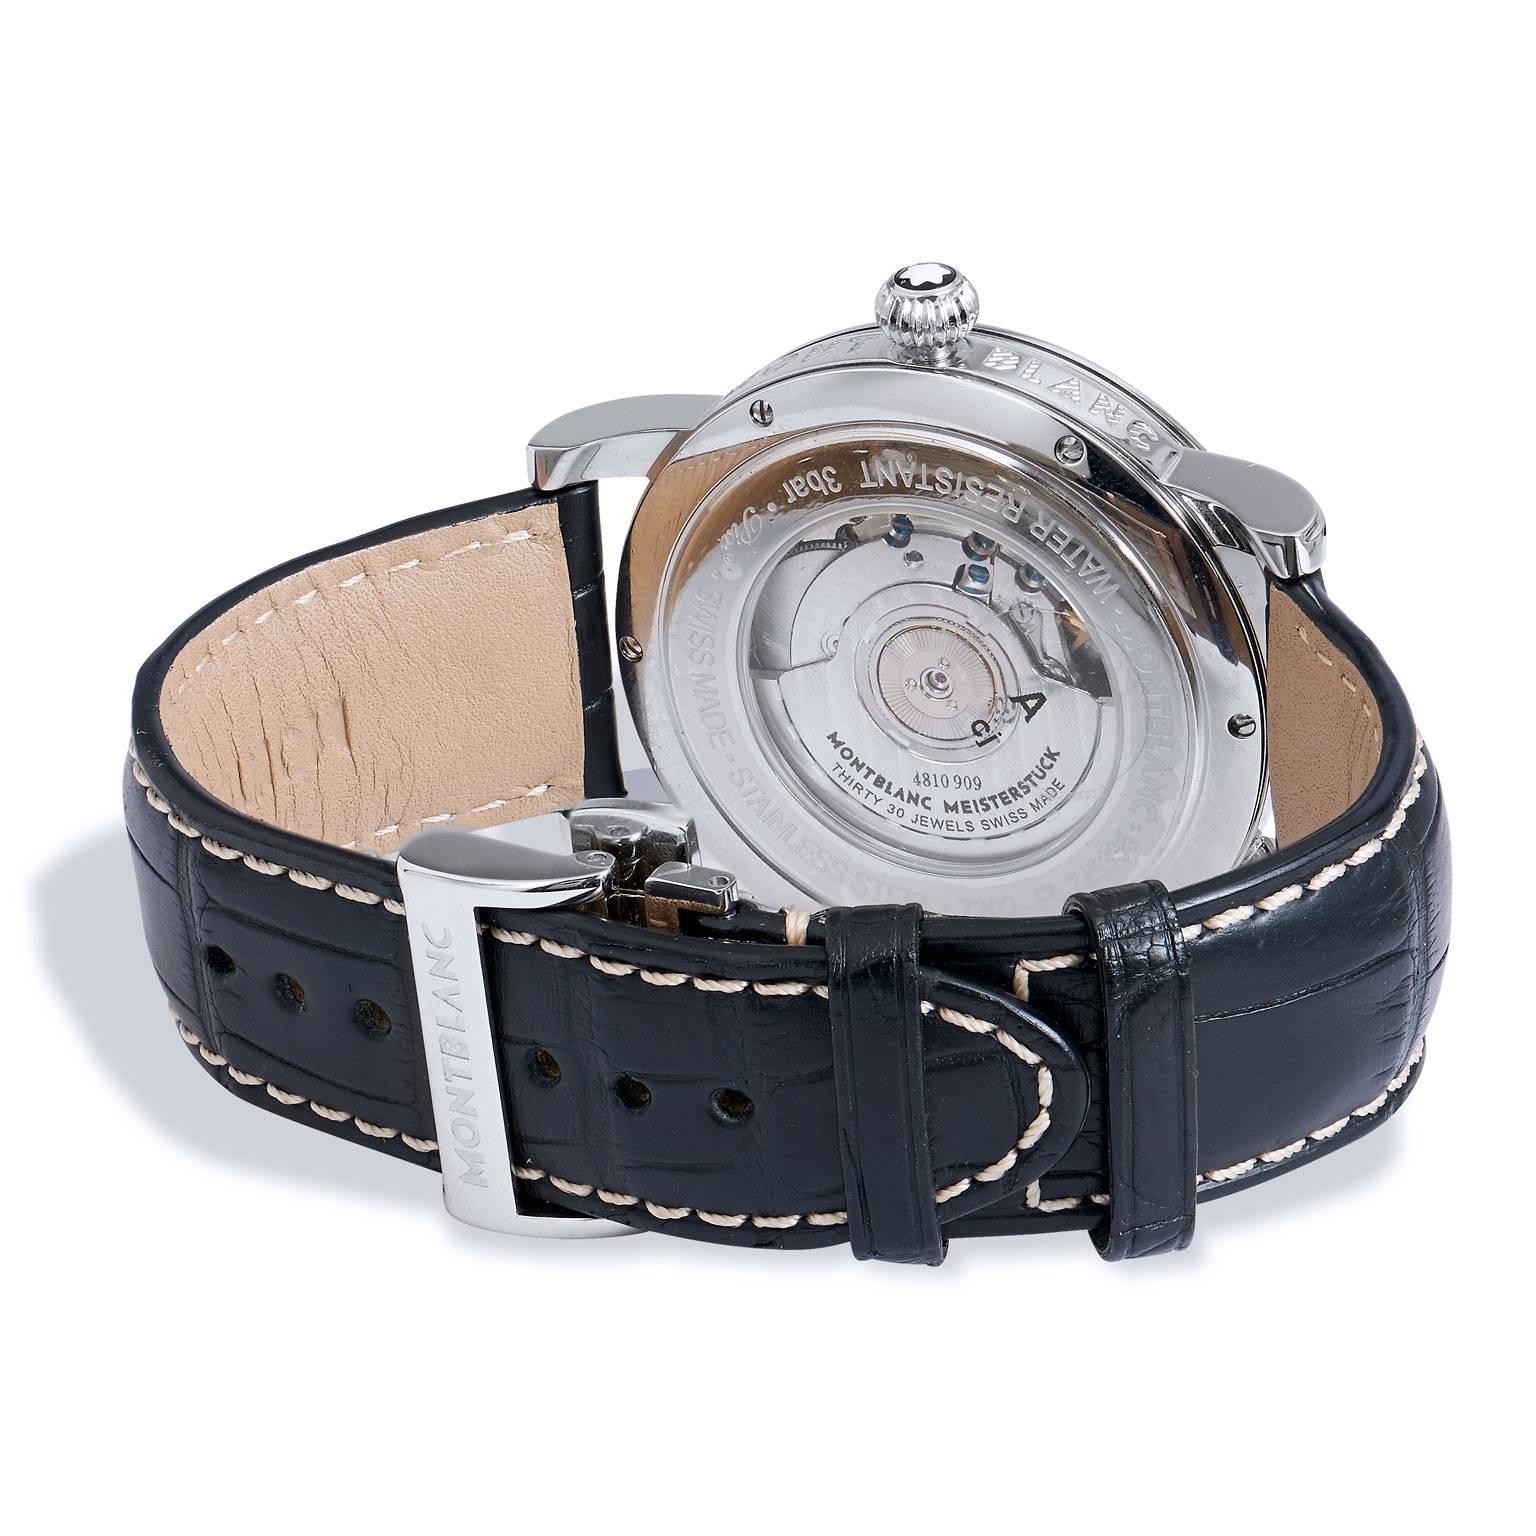 The SS Mont Blanc Star Steel Collection 42 MM automatic retrograde, 30 jewel black dial, black alligator strap wristwatch is an elegant and sleek timepiece. With classic arabic numerals to increase clarity, this wristwatch is a great edition for